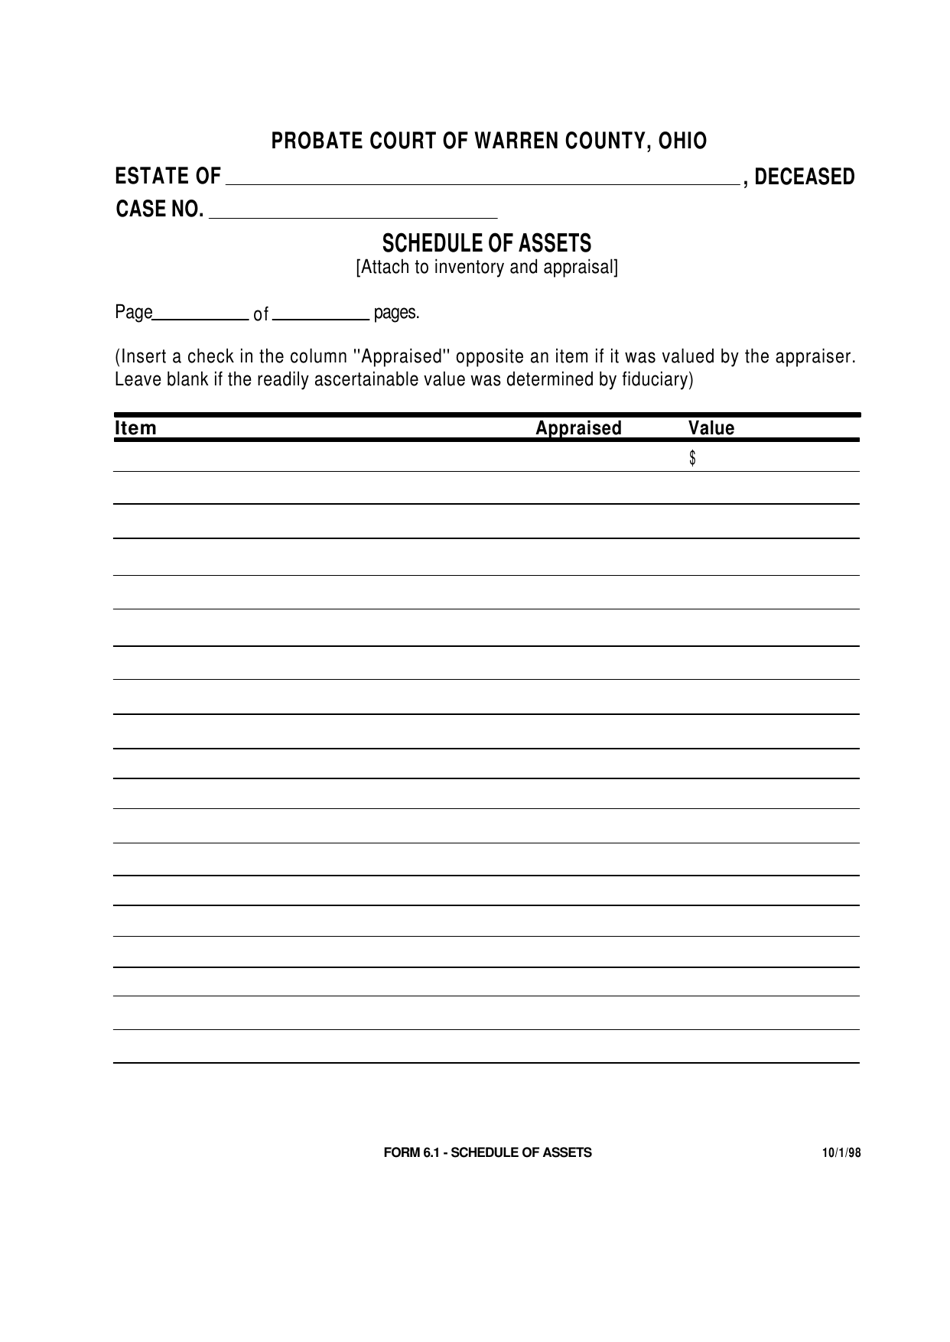 Form 6.1 Schedule of Assets - Warren County, Ohio, Page 1